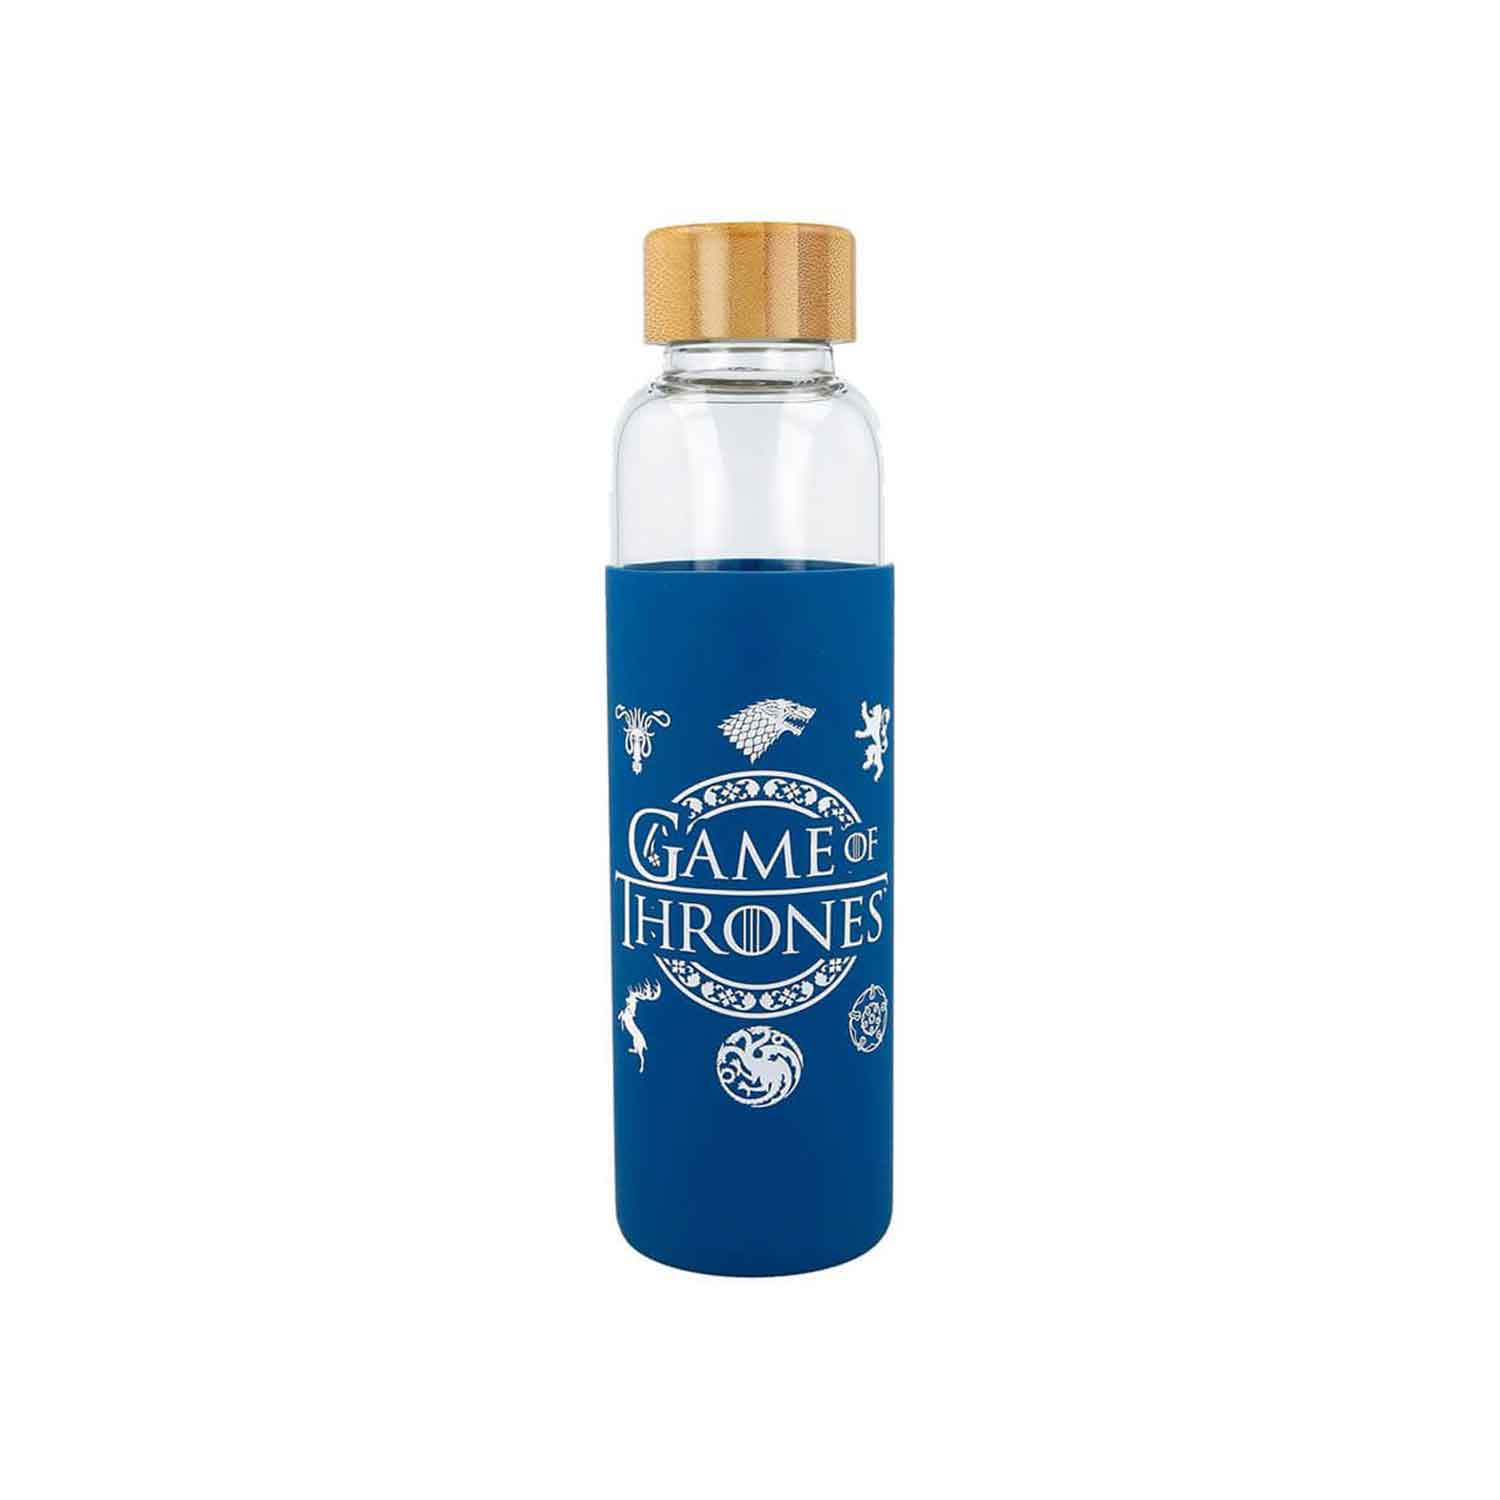 game-of-thrones-houses-with-silicon-cover-glass-bottle-1